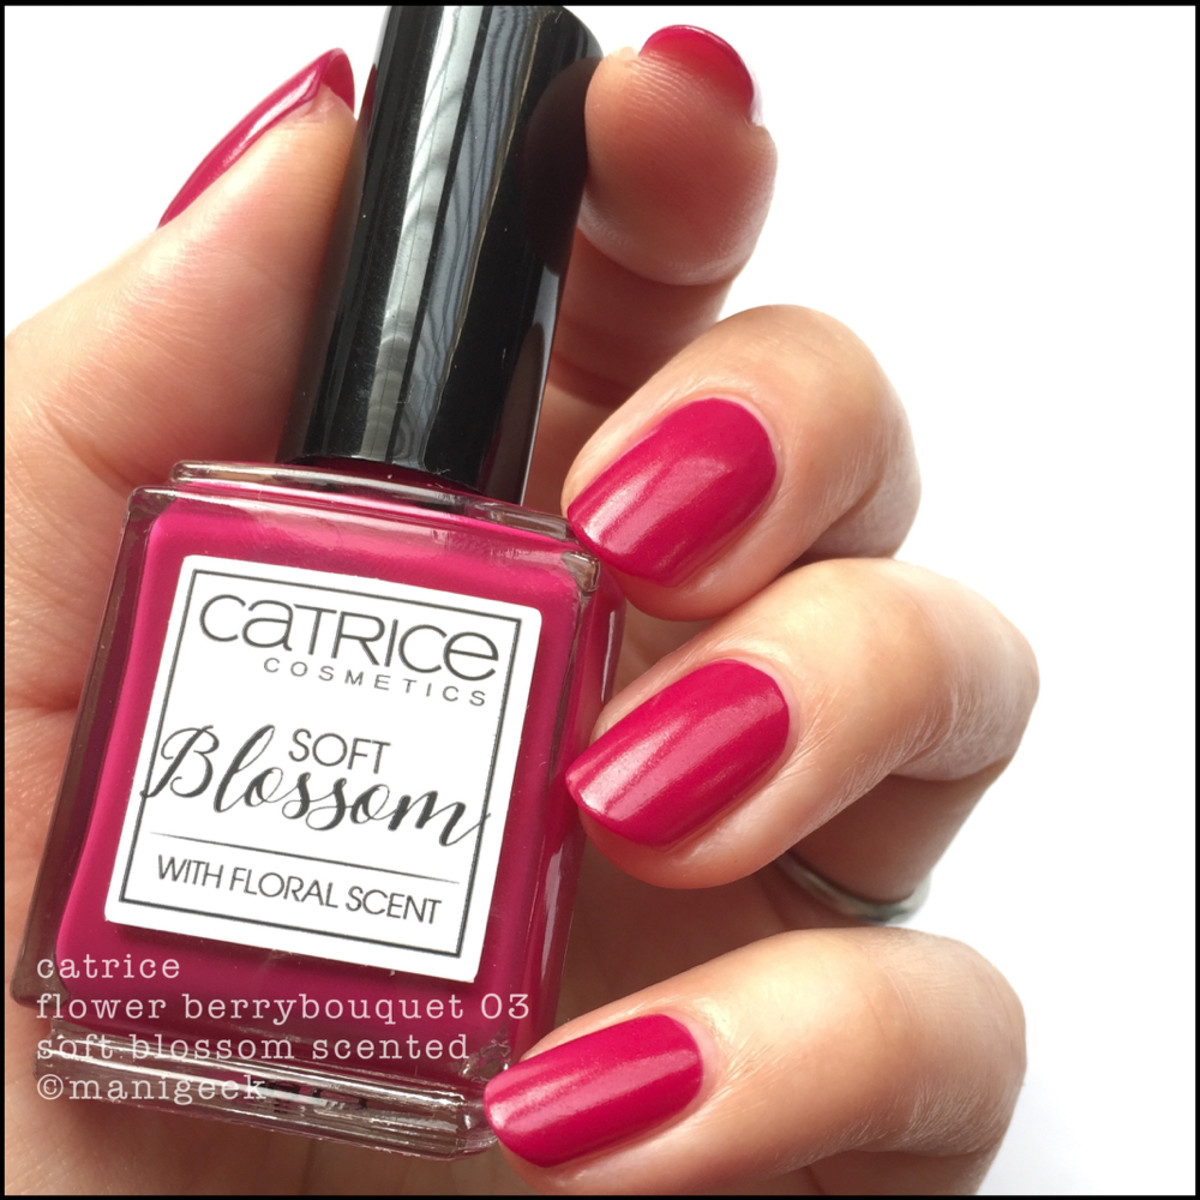 Catrice Flower BerryBouquet no top _ Catrice Soft Blossom Scented Nail Polish Swatches